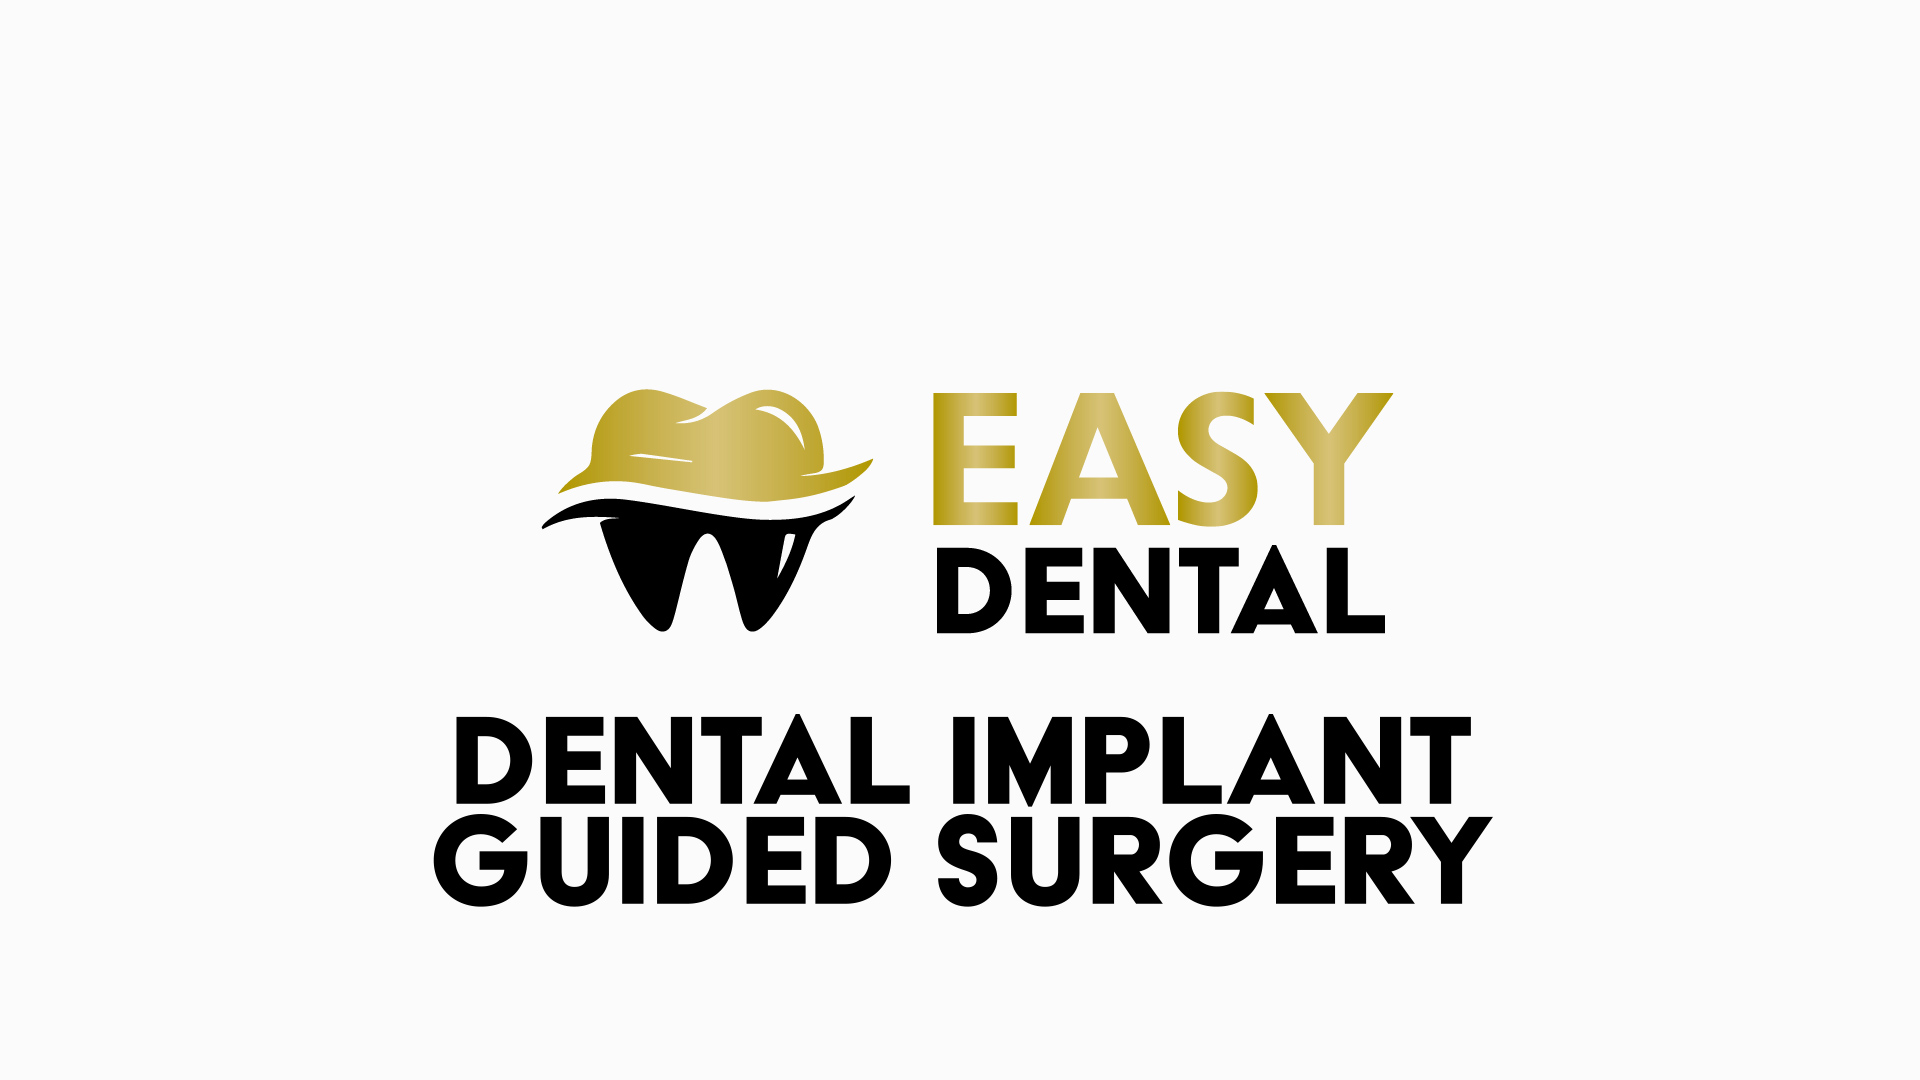 Guided Implant Video